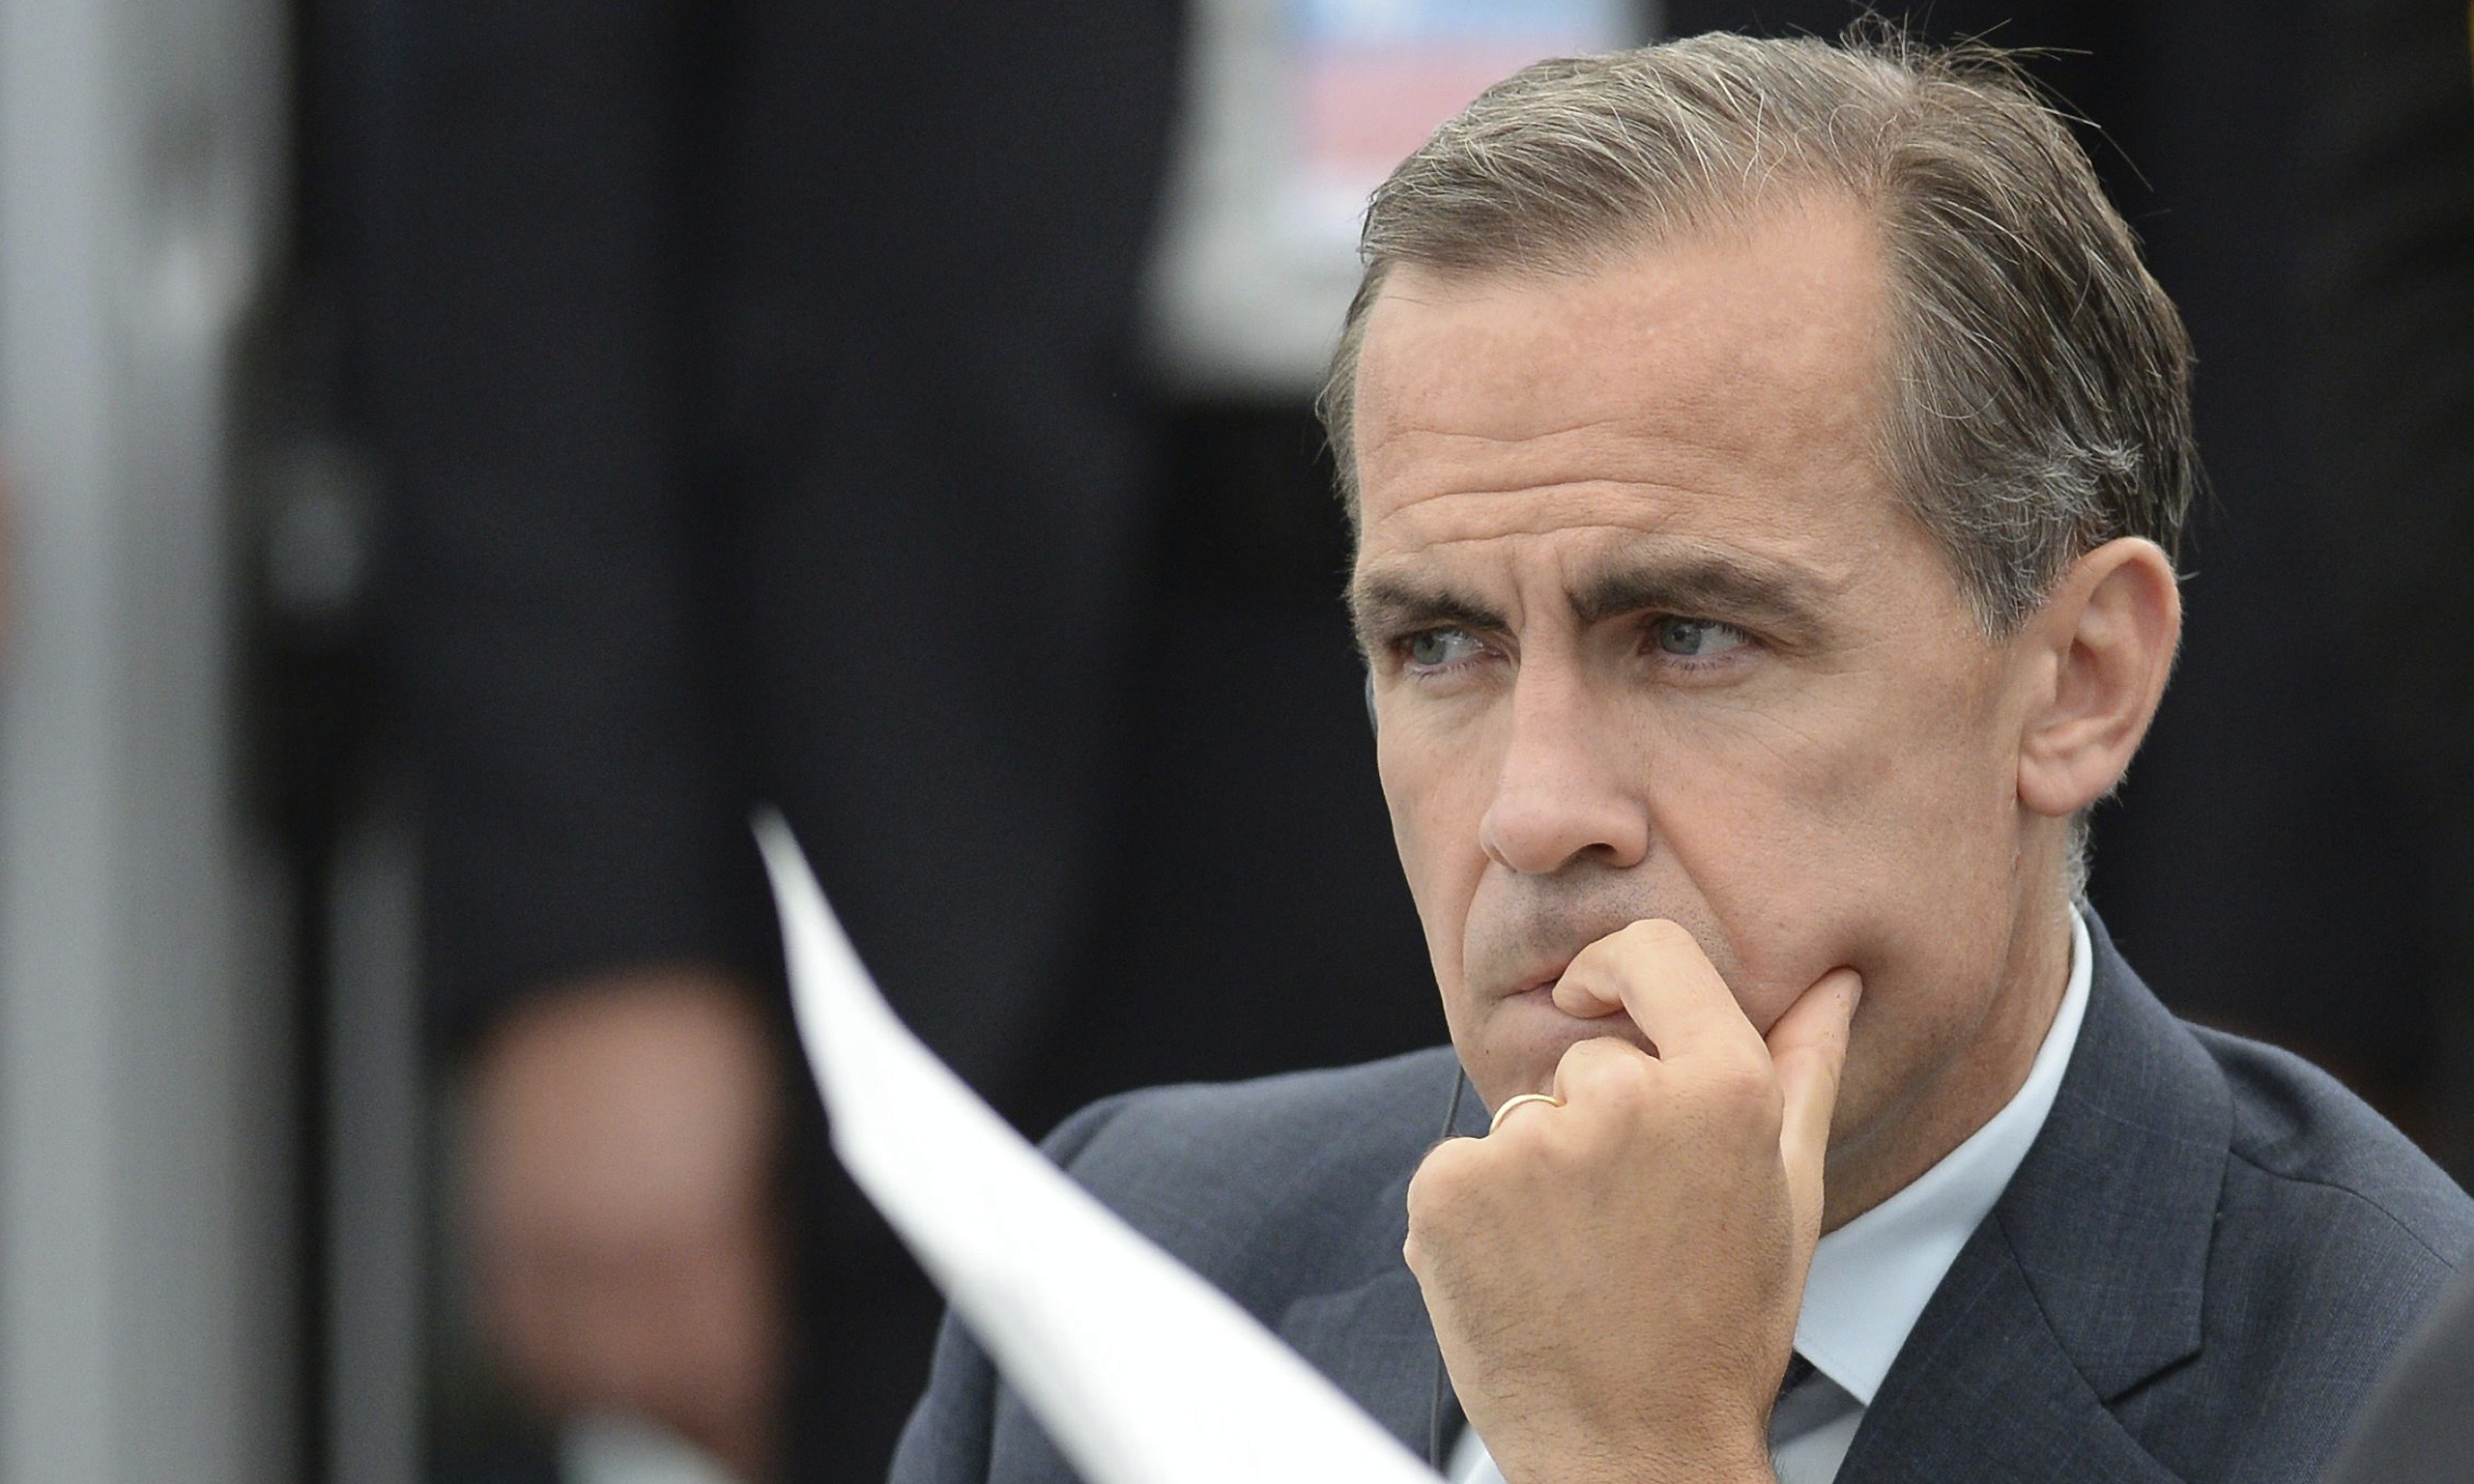 https://static-secure.guim.co.uk/sys-images/Business/Pix/pictures/2014/1/22/1390390266109/Mark-Carney-014.jpg